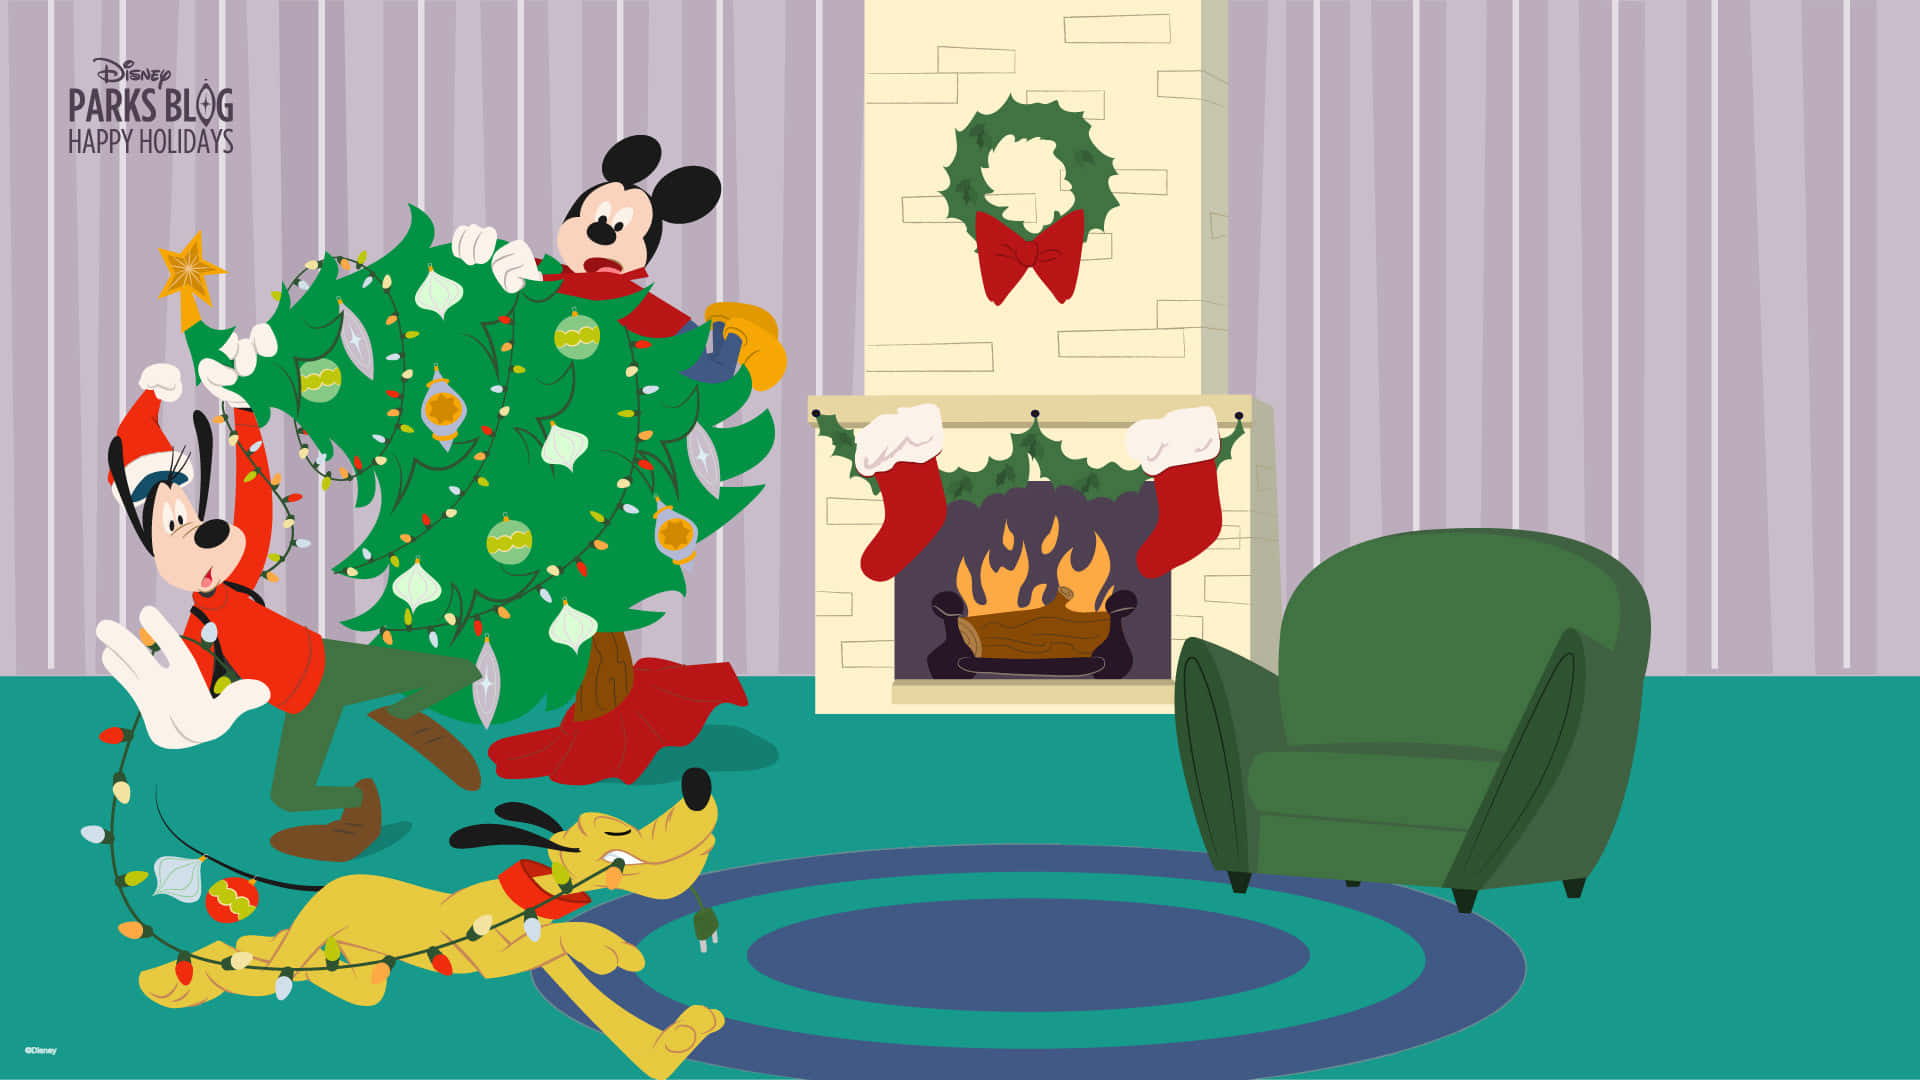 Make your holiday season magical-Celebrate Christmas with Disney on your iPad! Wallpaper